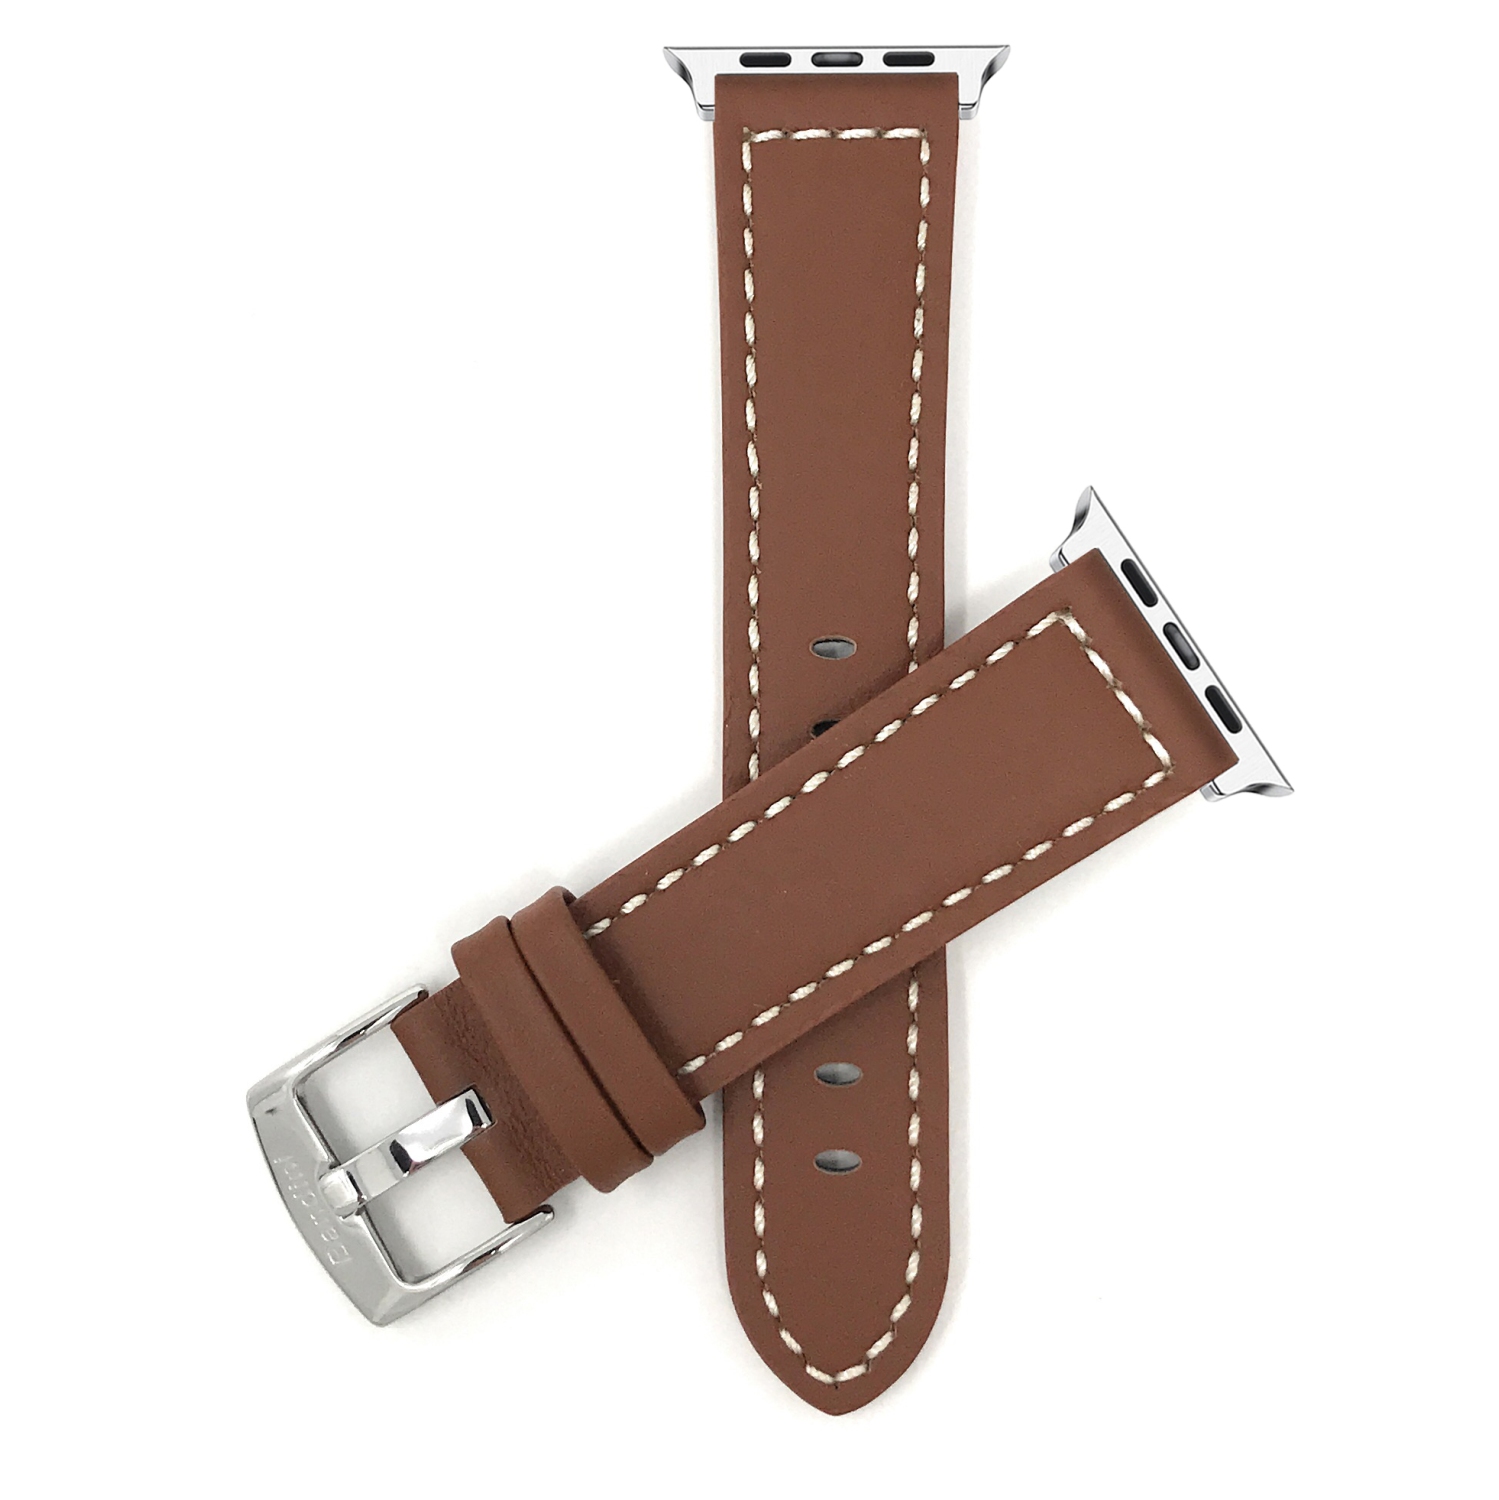 Tan, Racer, White Stitching, Leather 42mm / 44mm / 45mm / 49mm Apple Watch Strap Band, Stainless Steel Buckle, Series 8 7 6 5 4 3 2 1 SE & Ultra